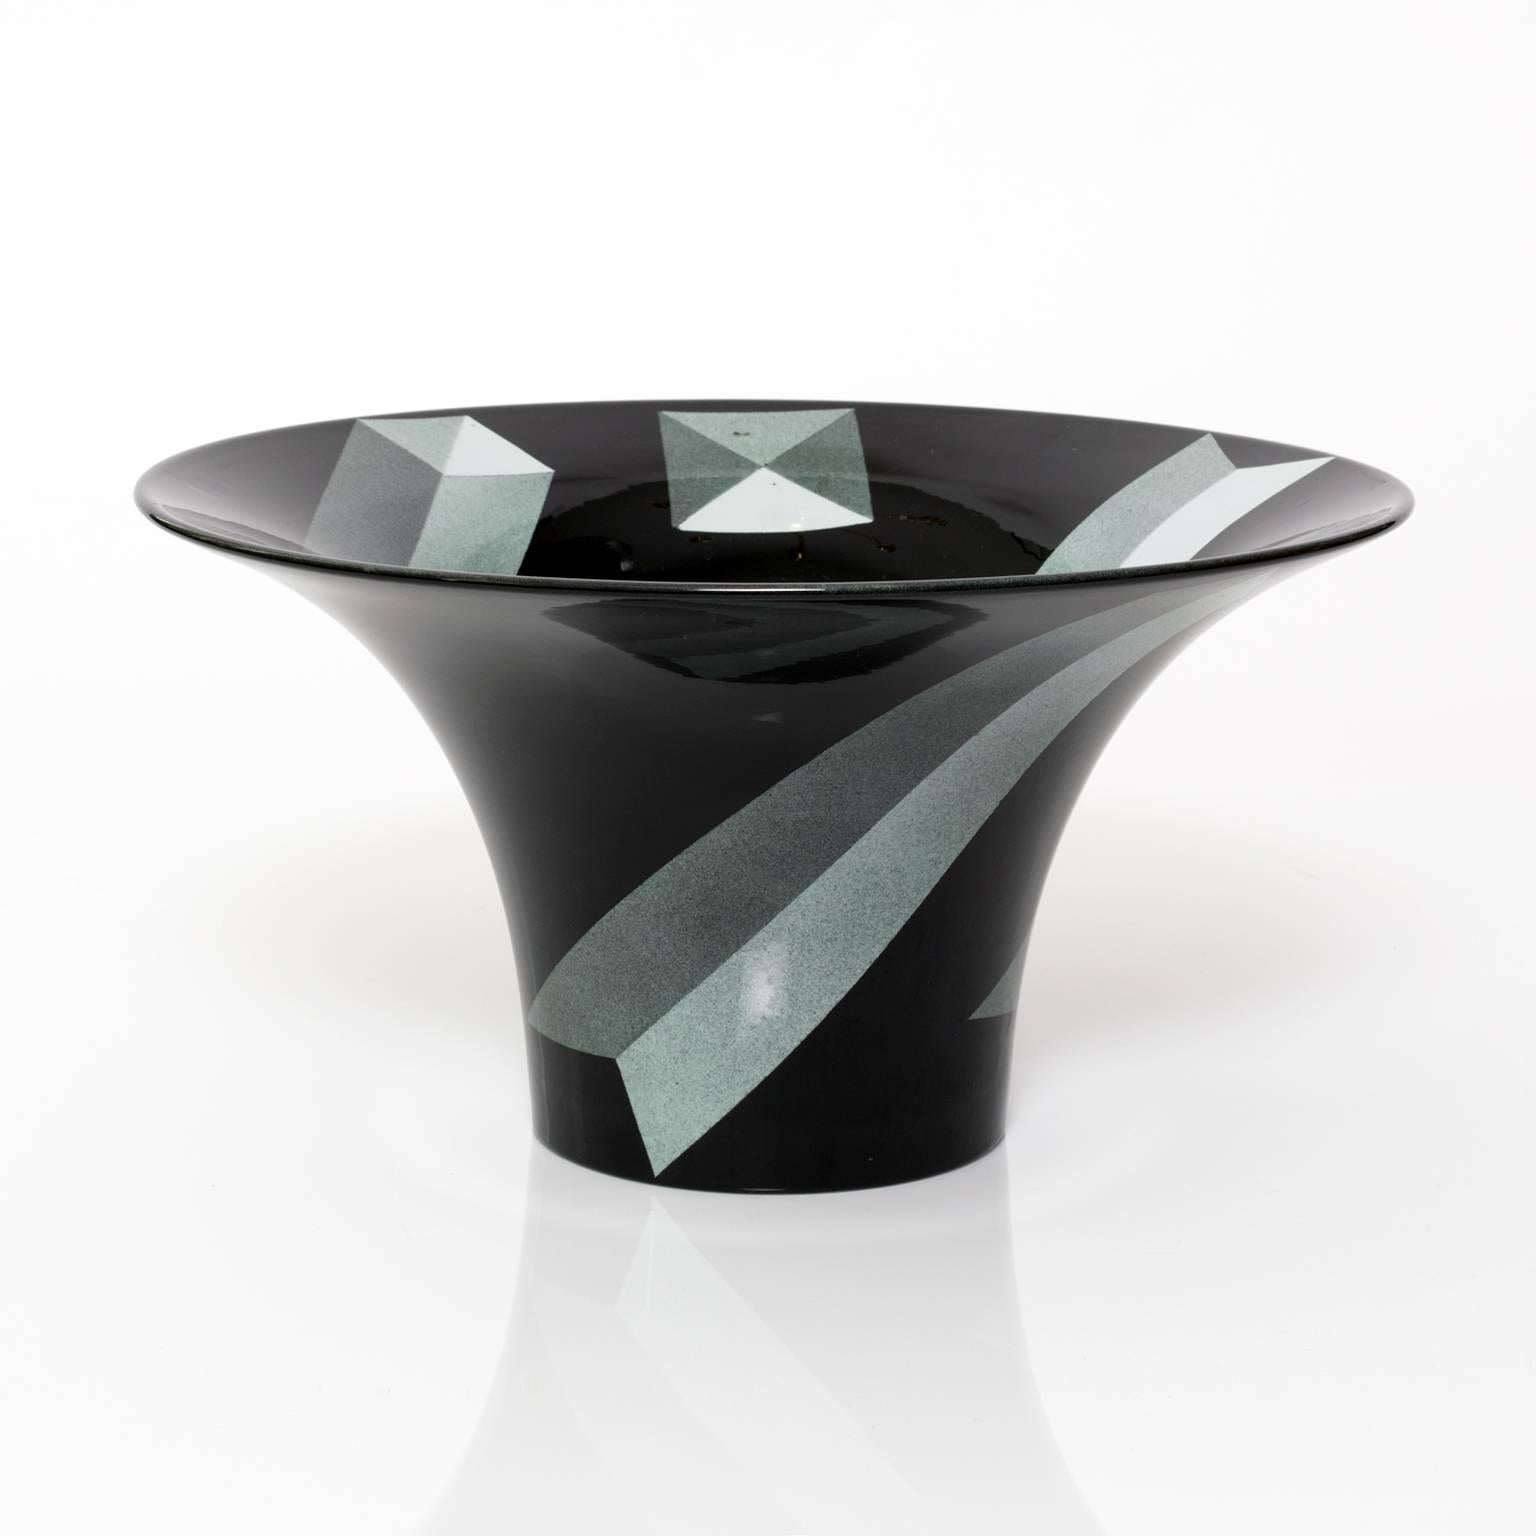 A large beautiful Scandinavian Modern, Postmodern porcelain bowl by Rolf Sinnemark for Rorstrand, Sweden. The black glazed bowl is decorated on the exterior and interior with depictions of obelisk forms.
 
Measures: Height: 6", diameter: